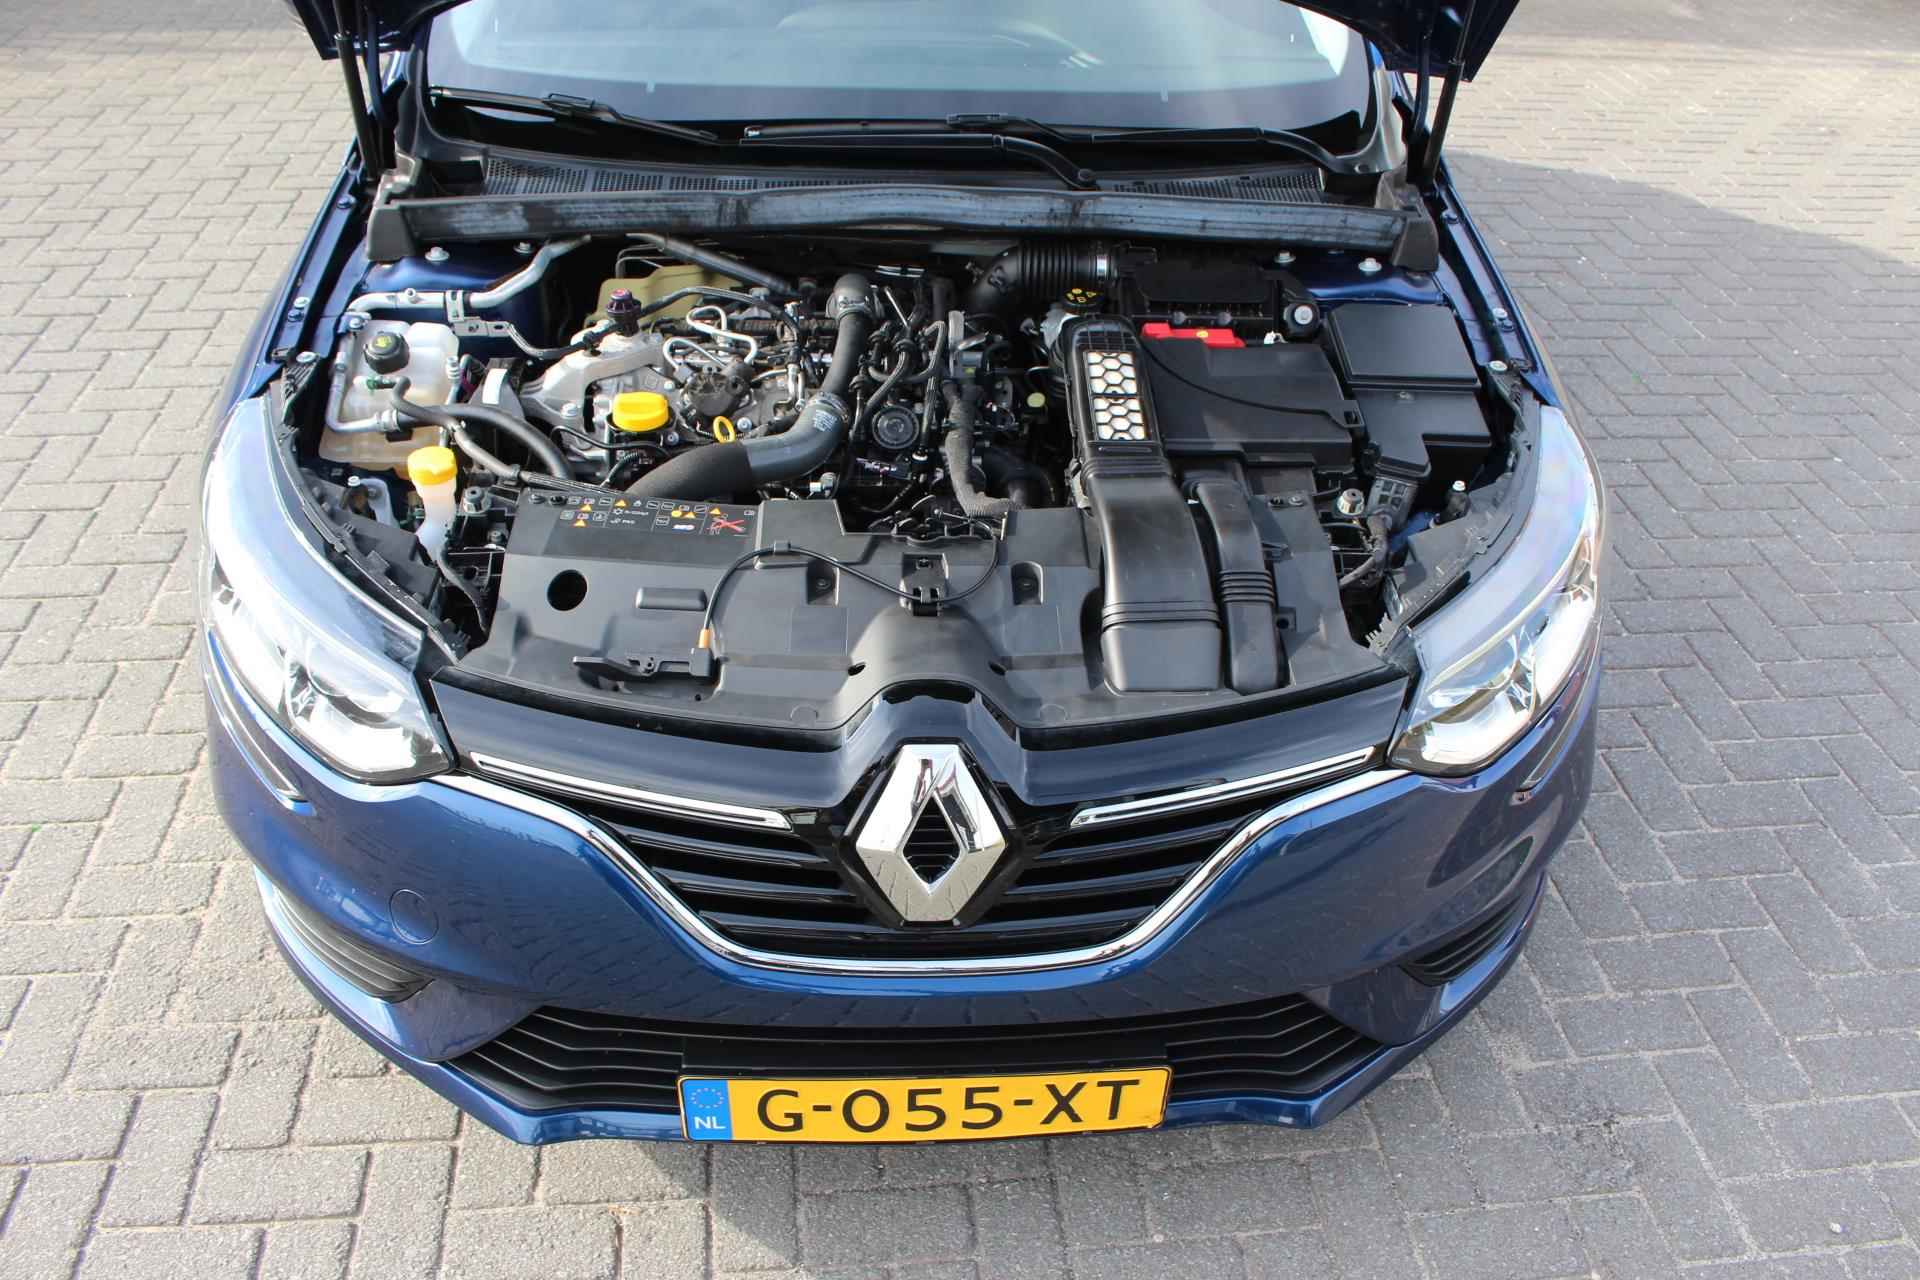 Renault Mégane 1.3 TCe Zen Dab+ audio Climate + cruise control Navi PDC achter Led verlichting voor + achter - 24/34